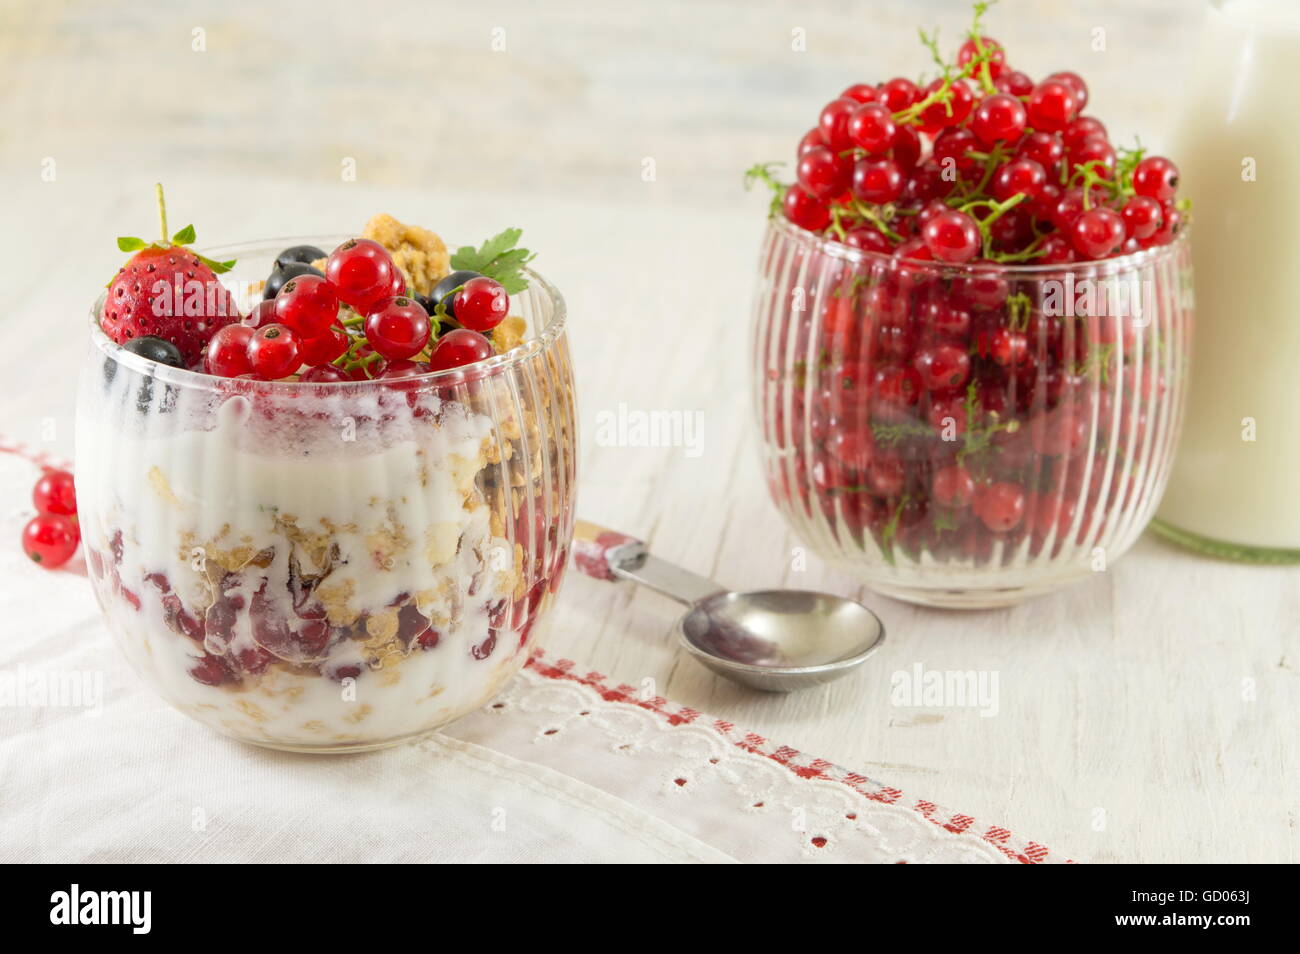 Granola parfait with berry fruit and cream. Healthy dessert Stock Photo